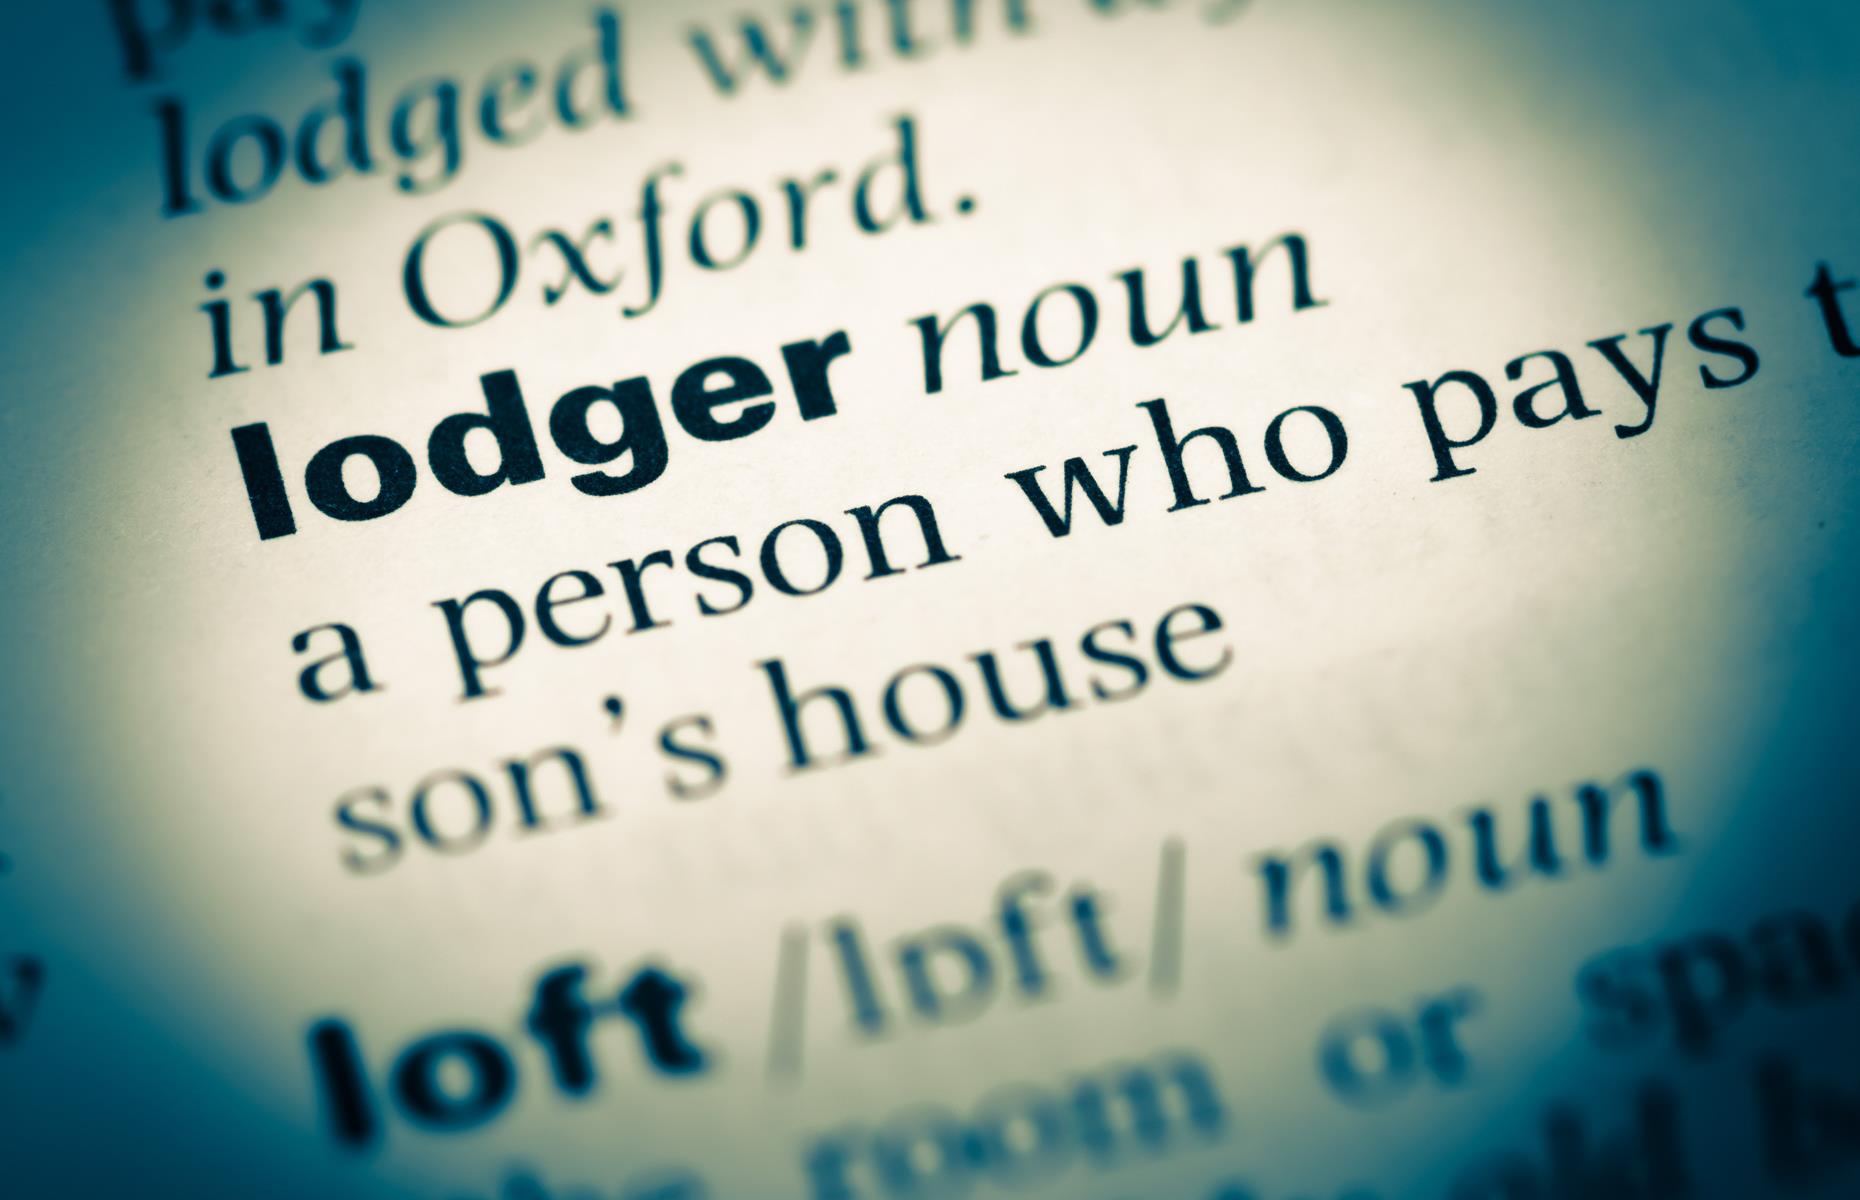 Take in a lodger